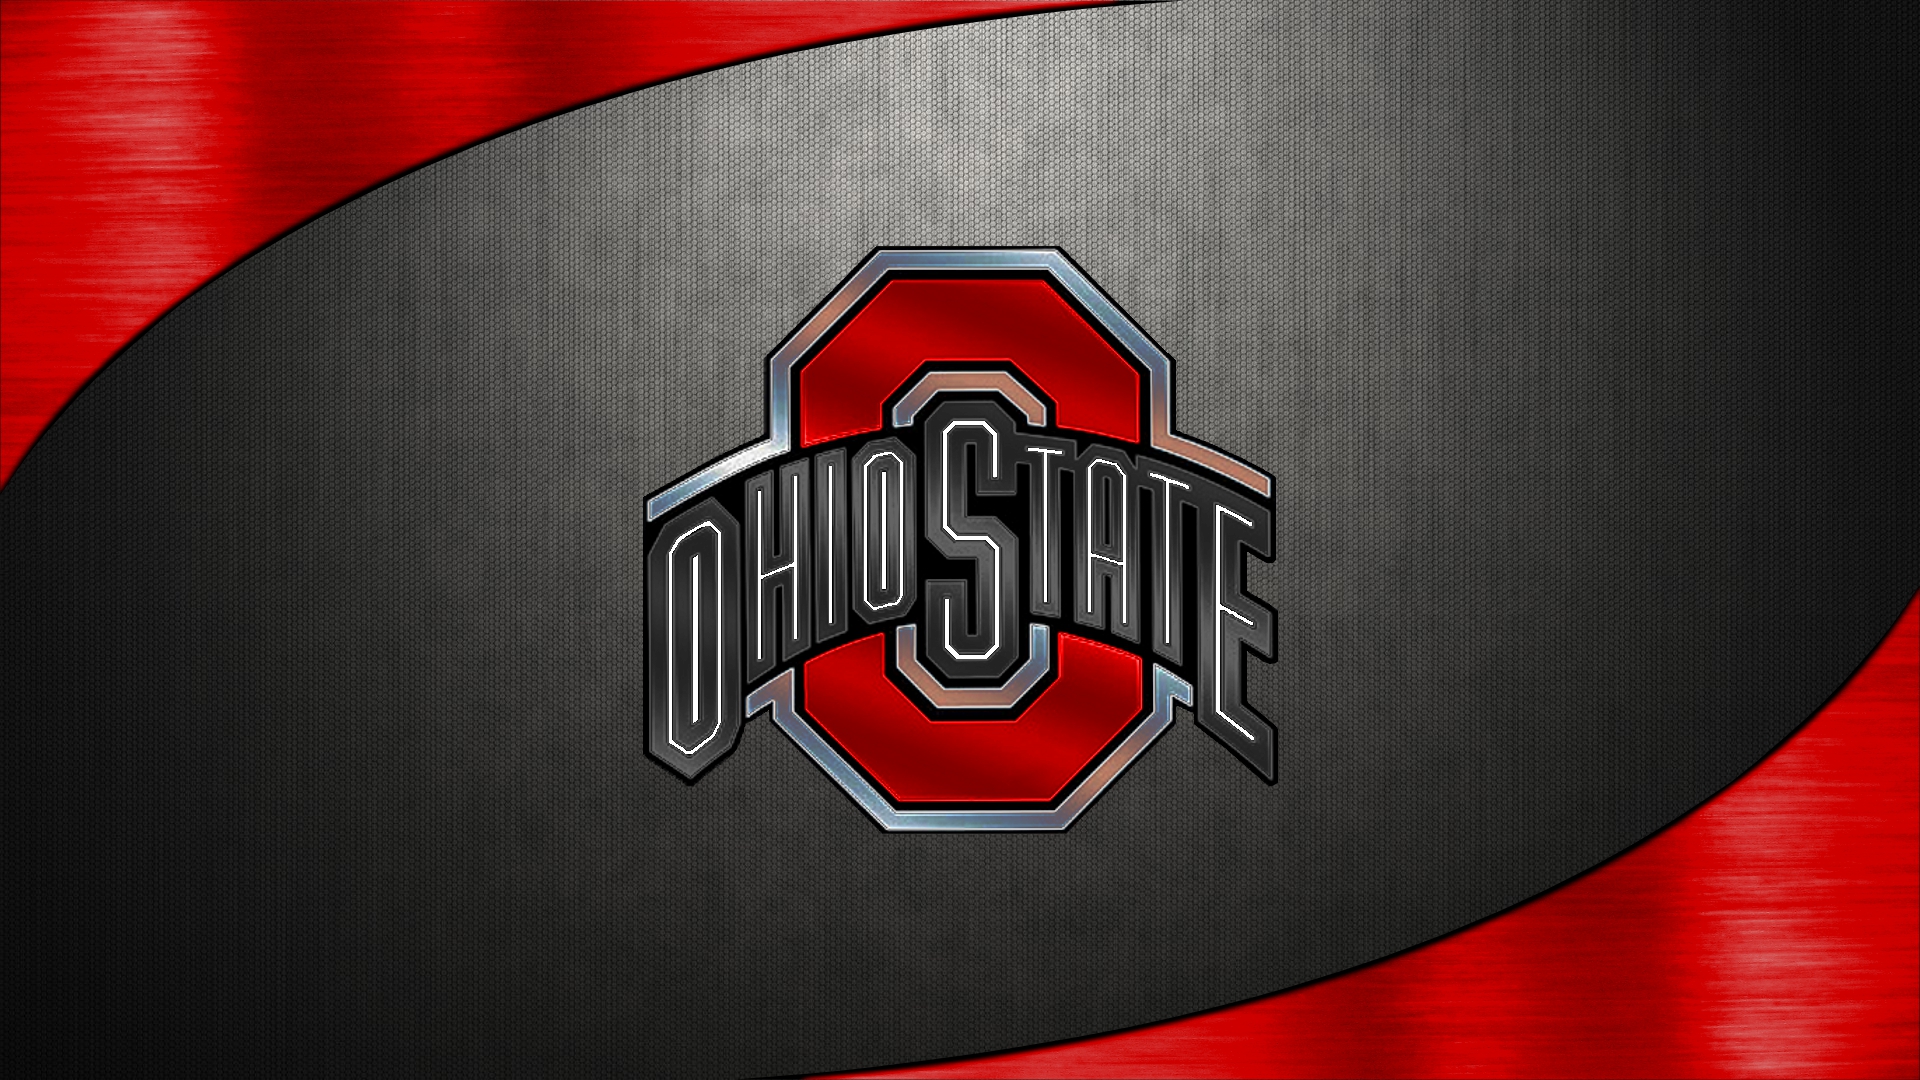 Ohio state football wallpapers